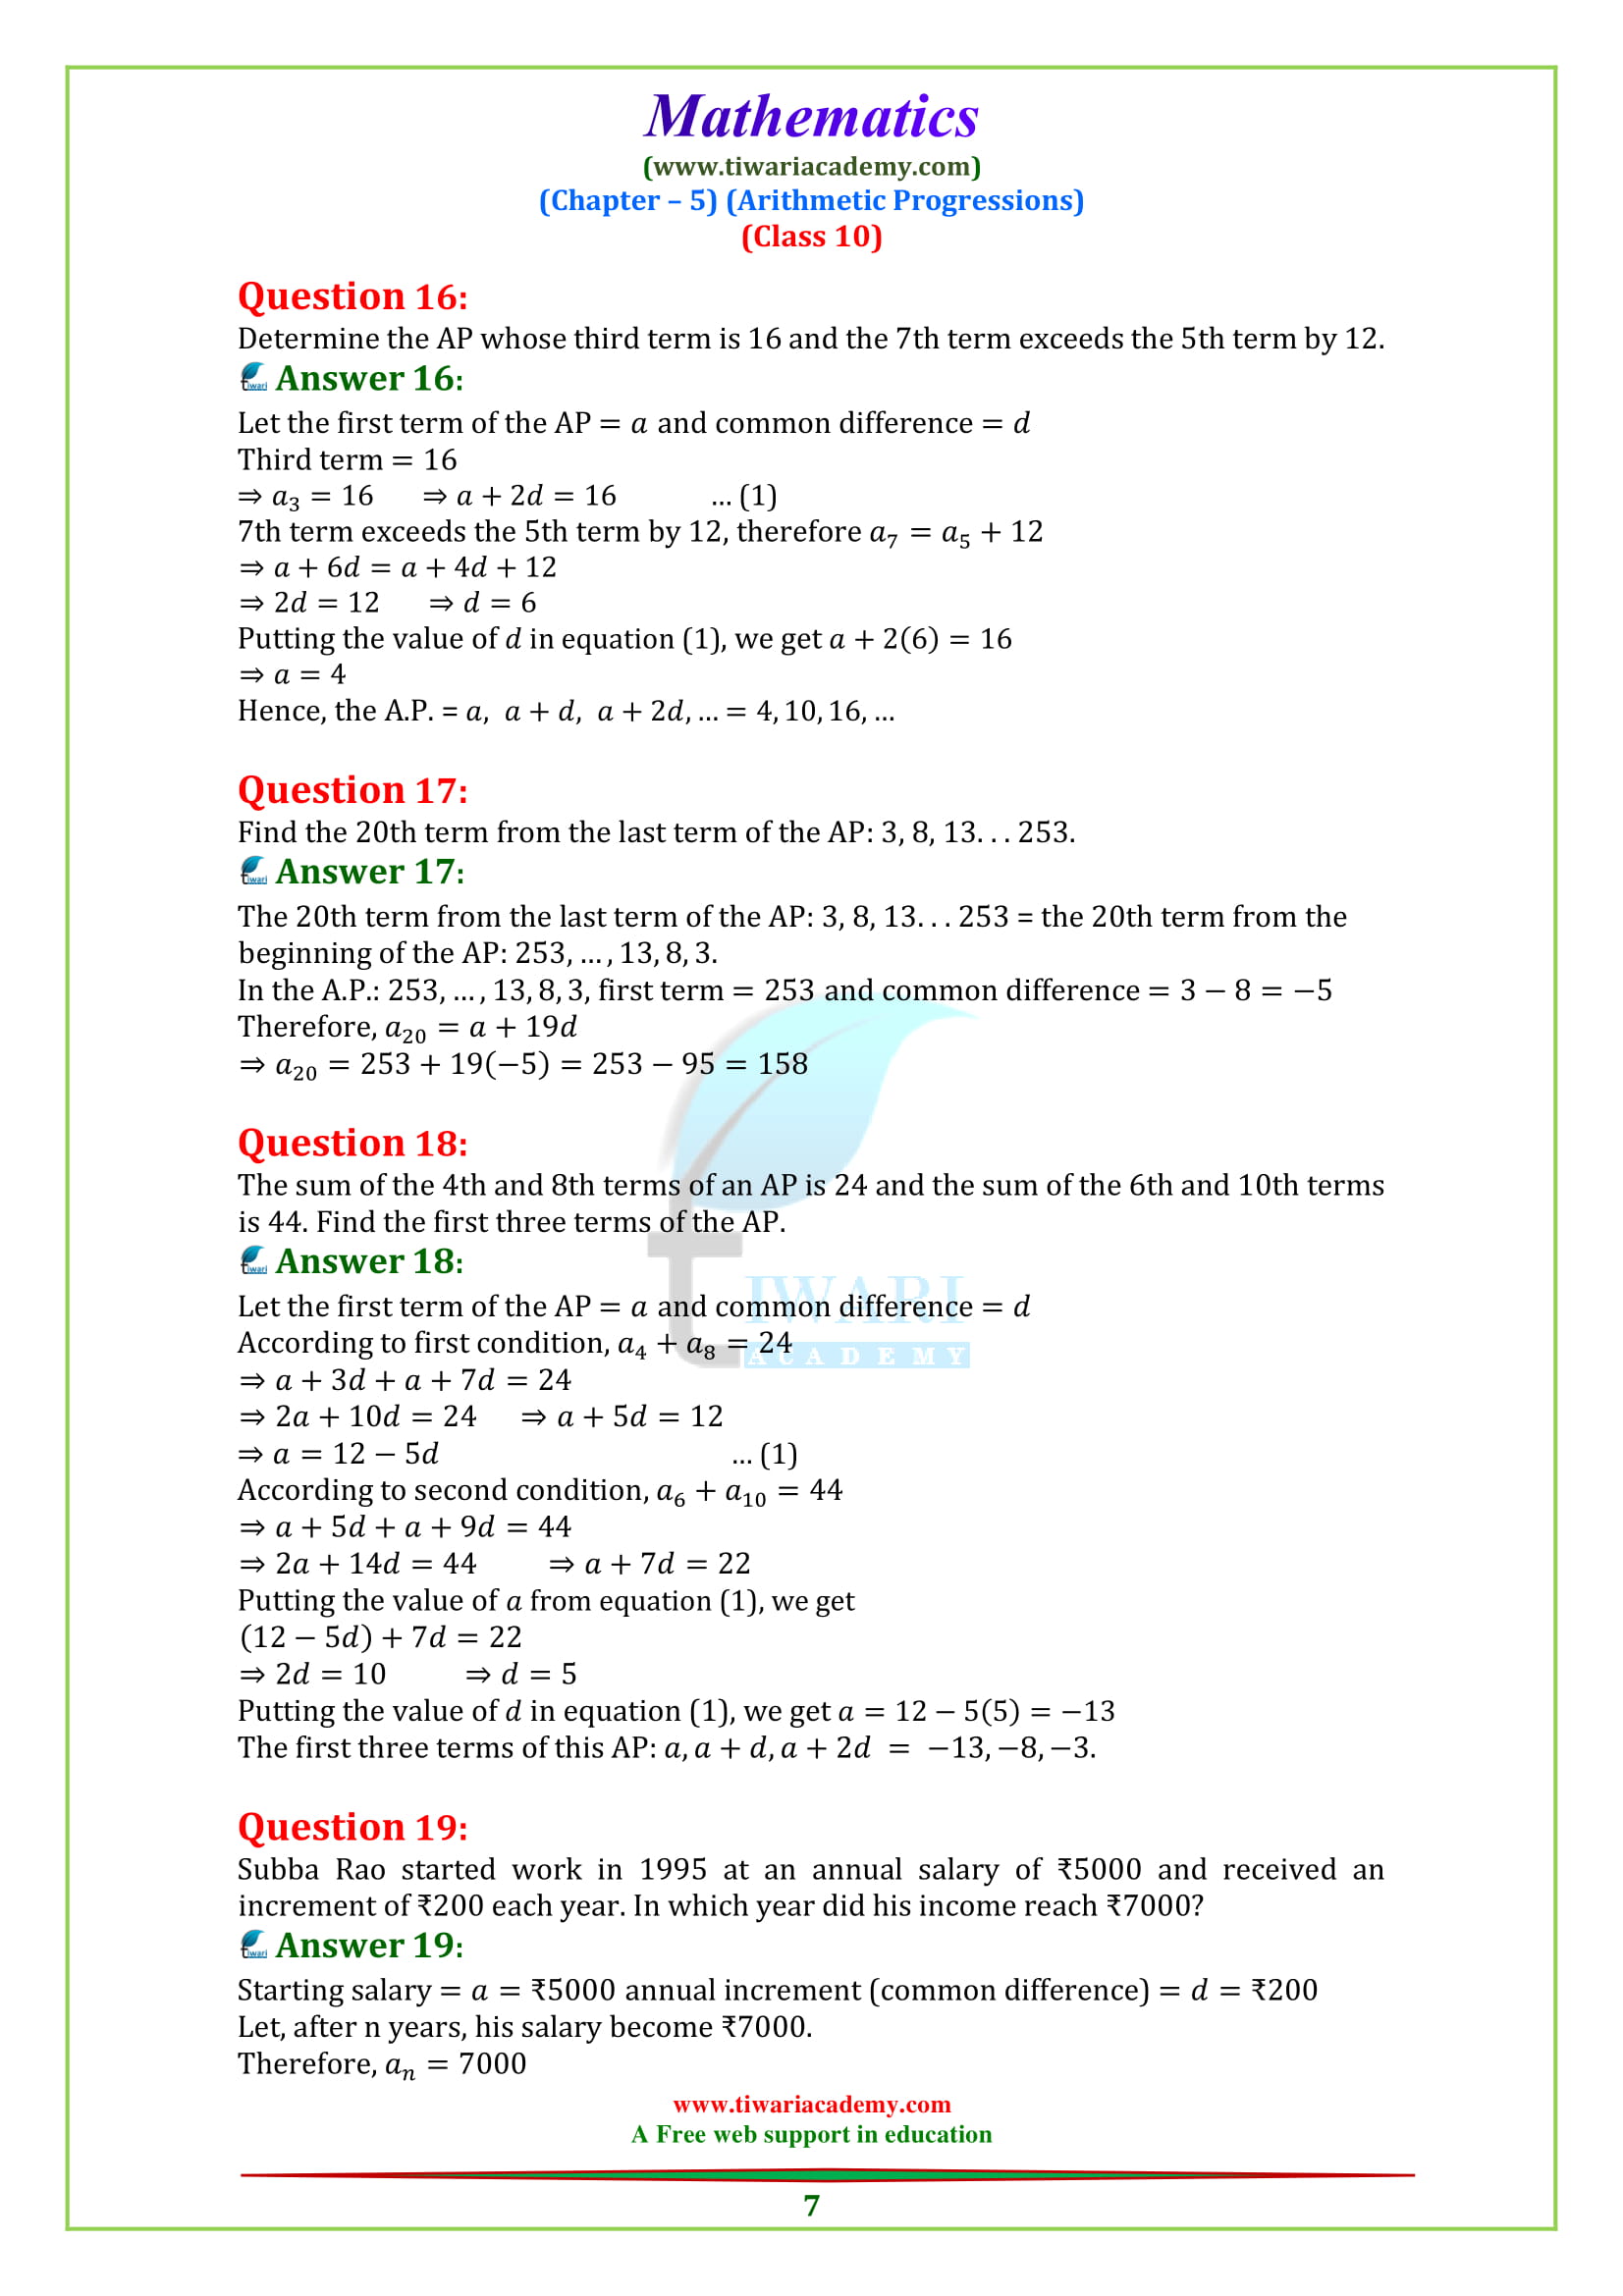 Class 10 Maths Chapter 5 Exercise 5.2 question 11, 12, 13, 14, 15